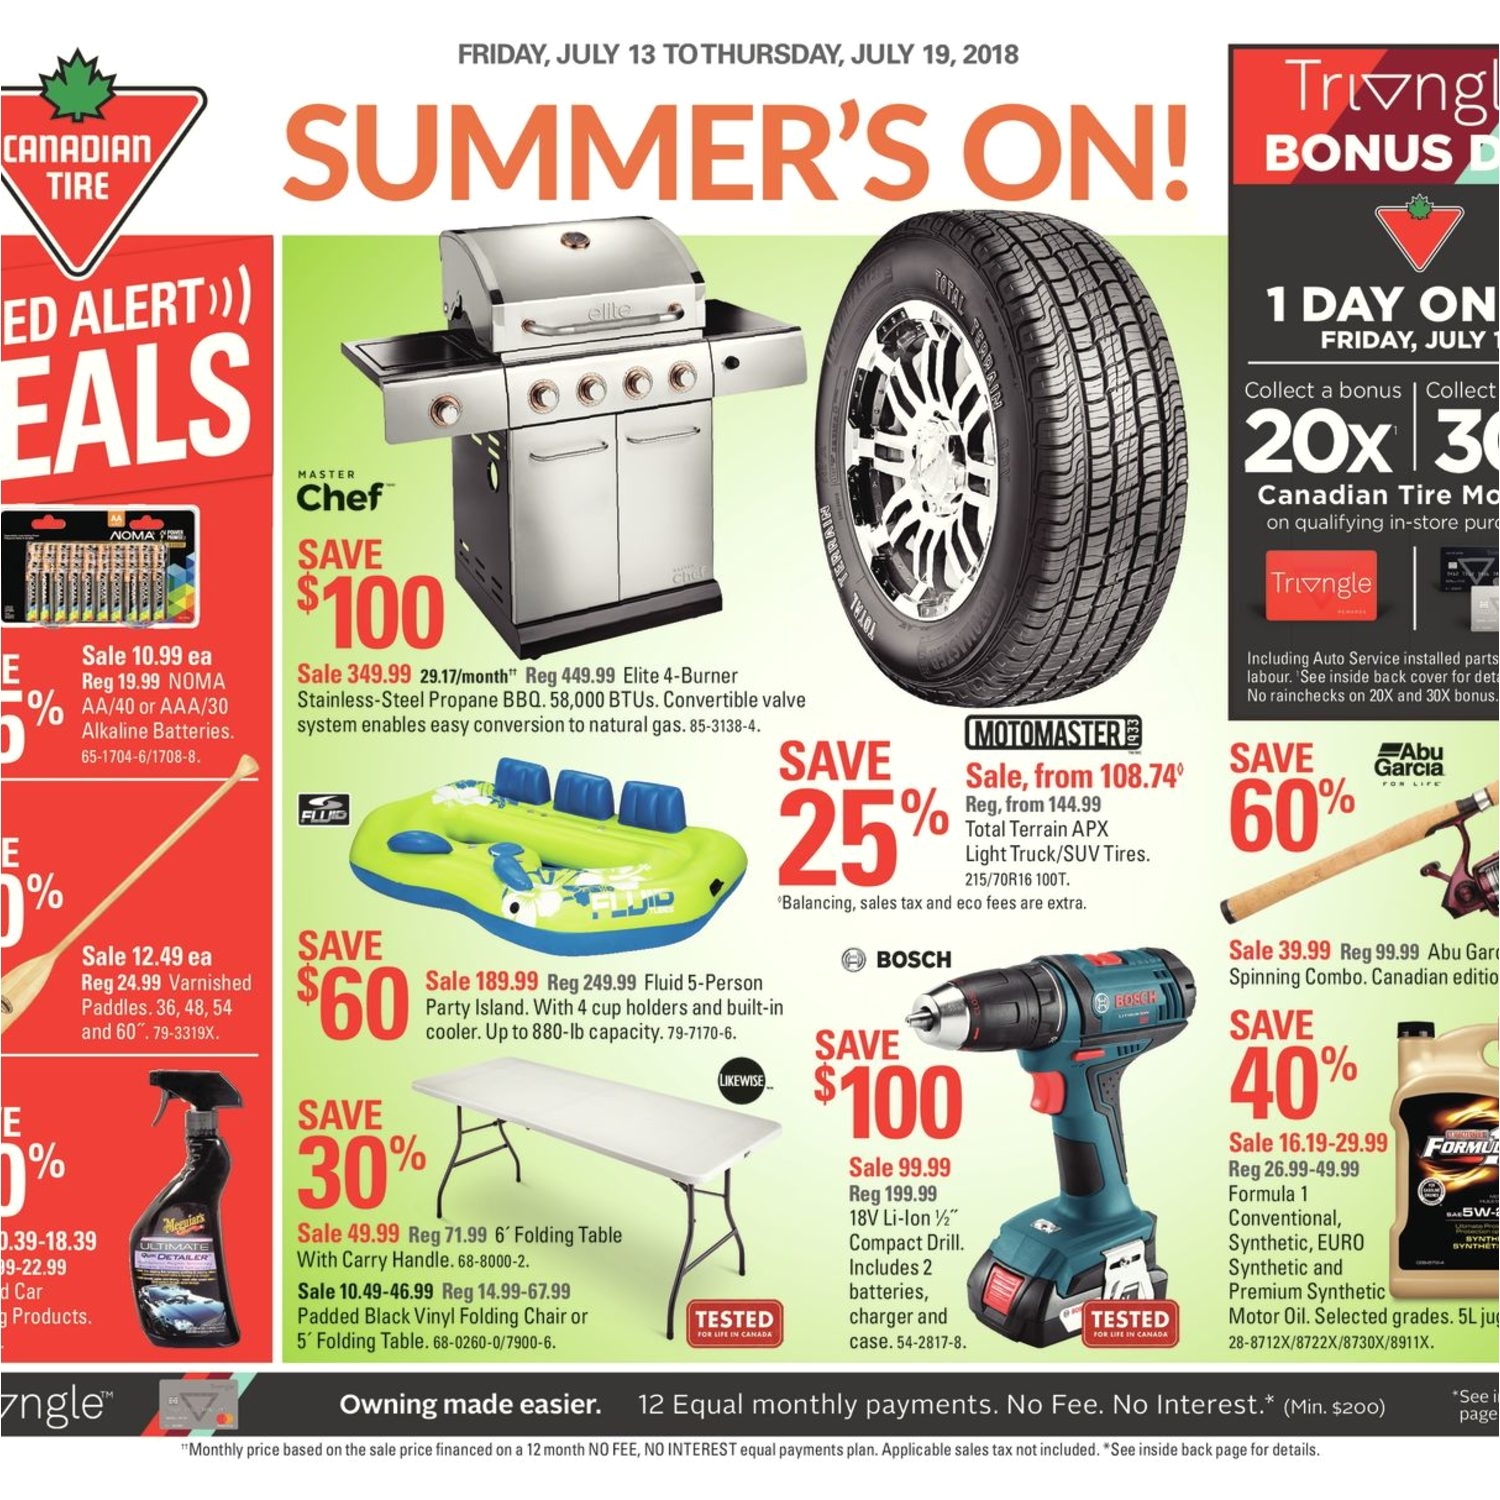 Rubbermaid Floor Mats Canadian Tire Canadian Tire Weekly Flyer Weekly Summer S On Jul 13 19